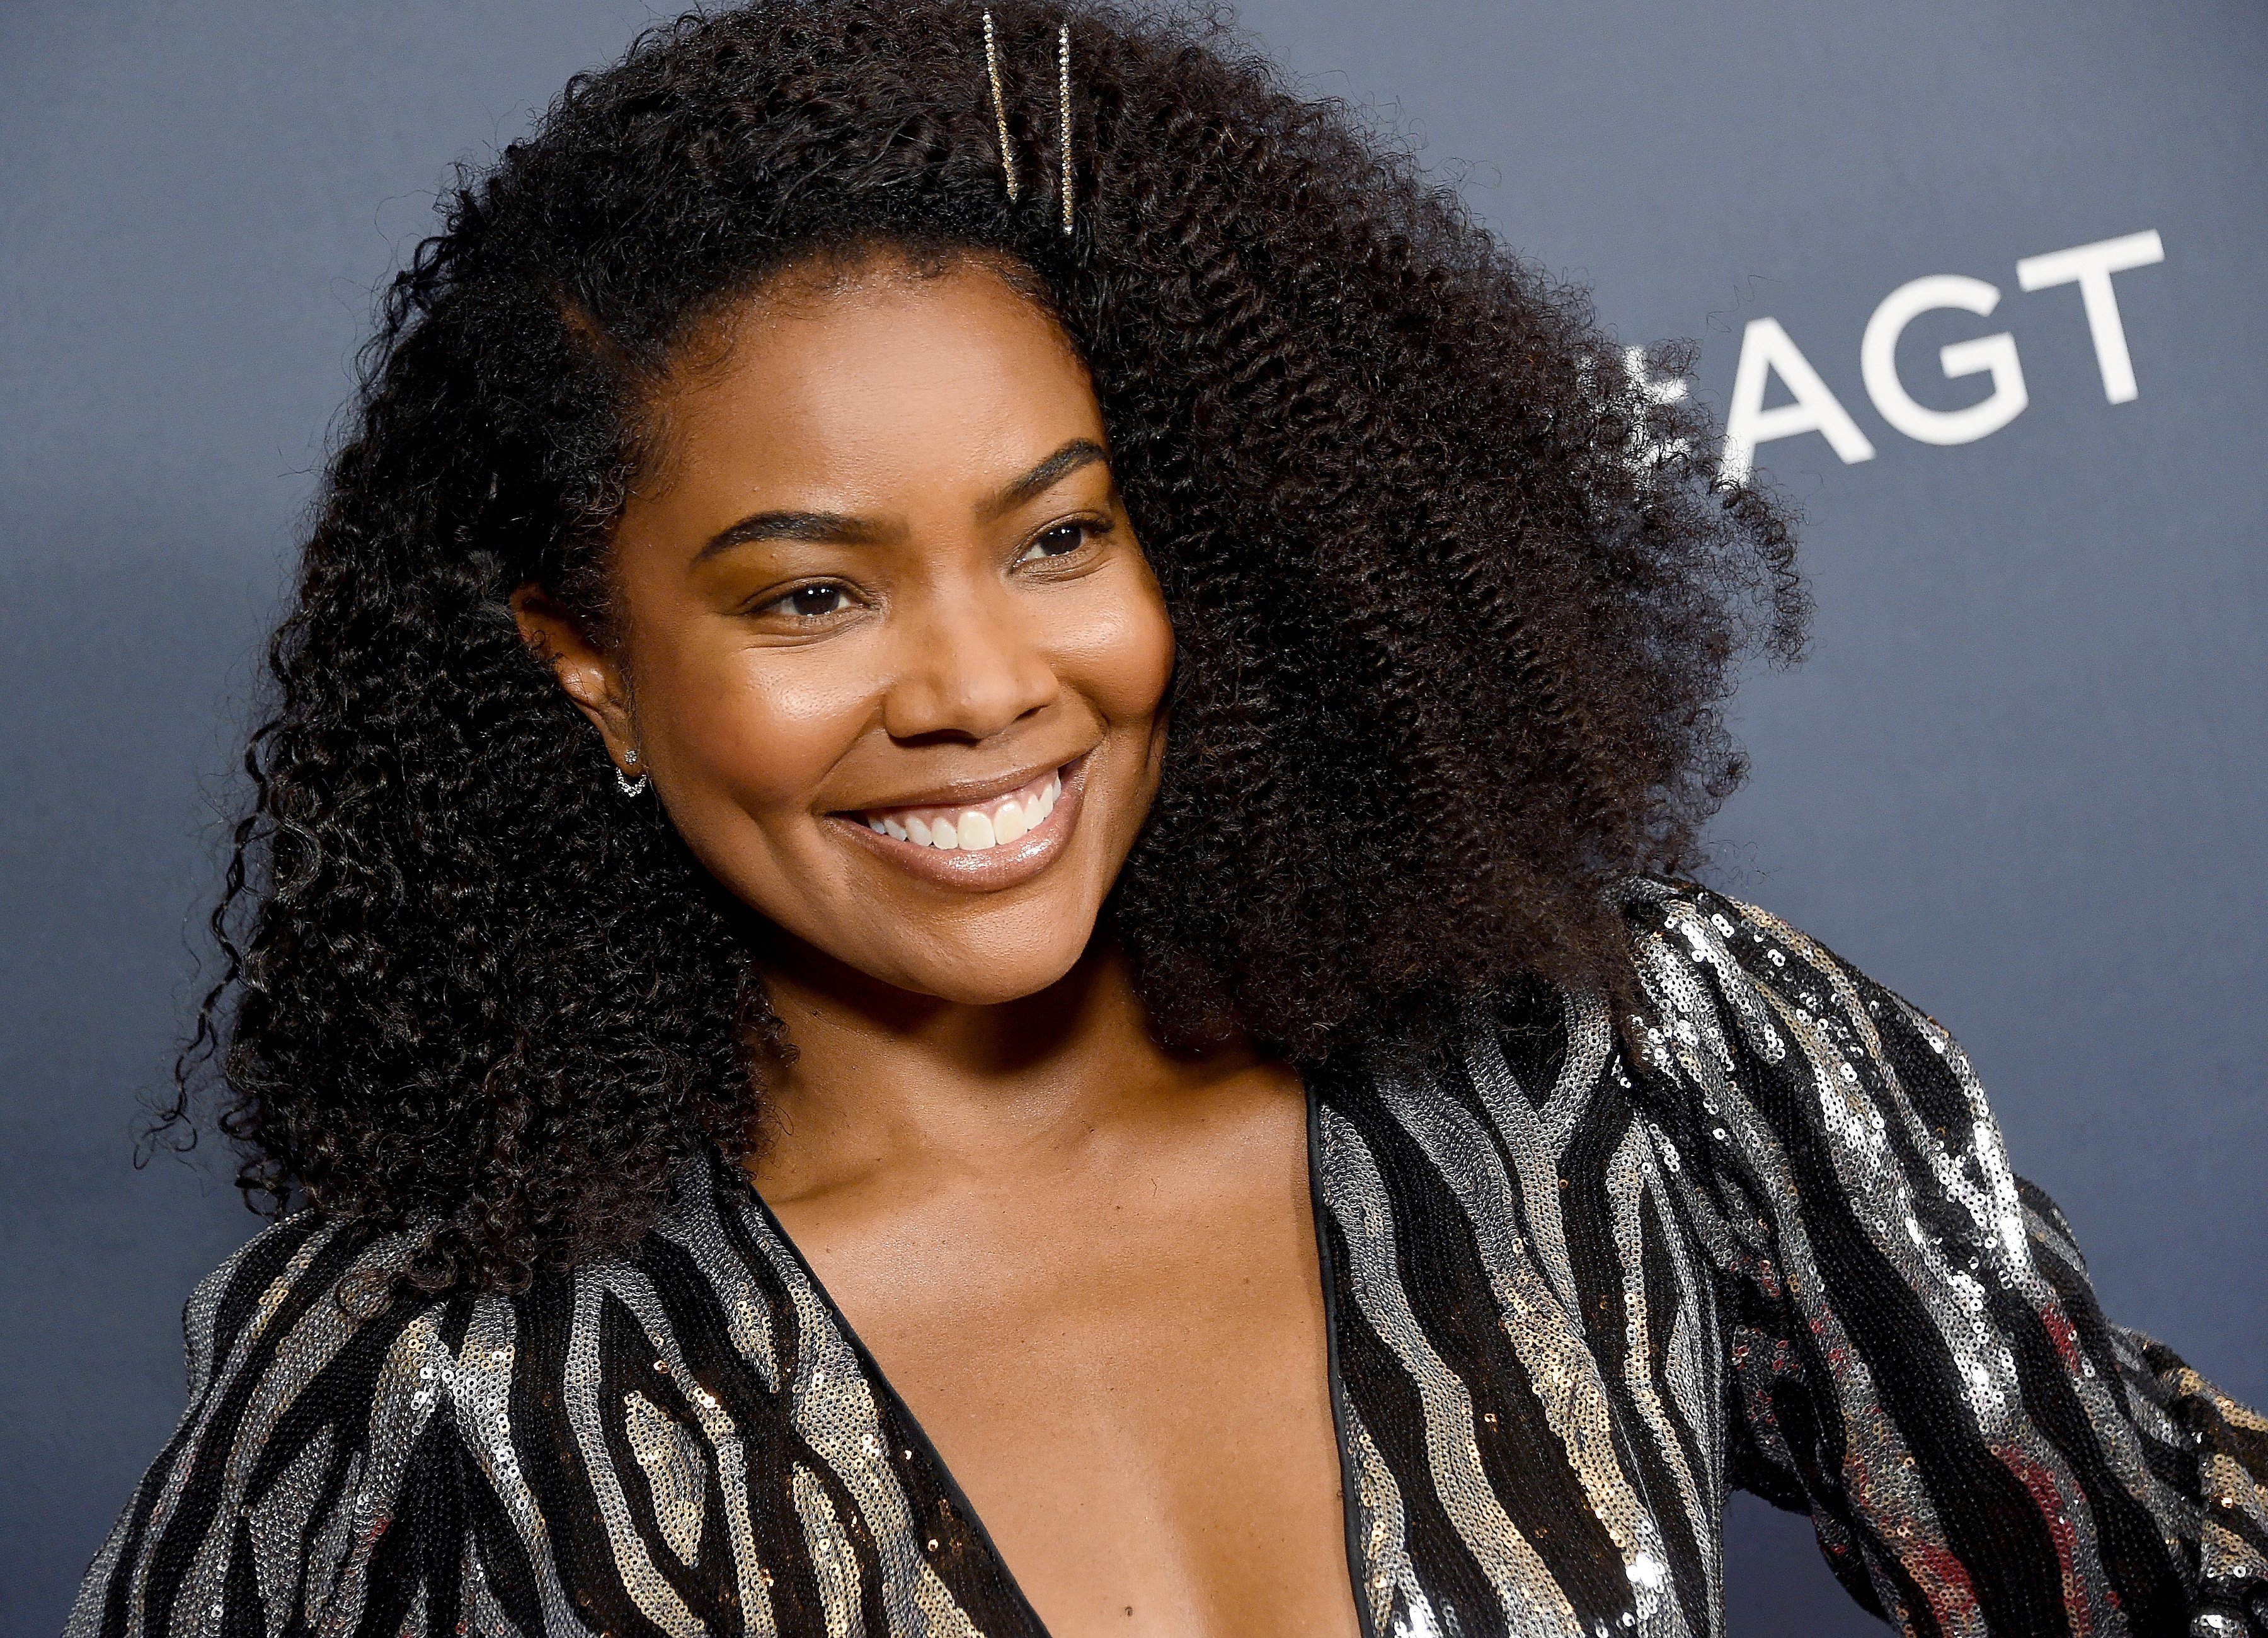 Gabrielle Union at the Season 14 live red carpet event for "America's Got Talent" at Dolby Theatre on September 10, 2019 in Hollywood, California  | Photo: Getty Images